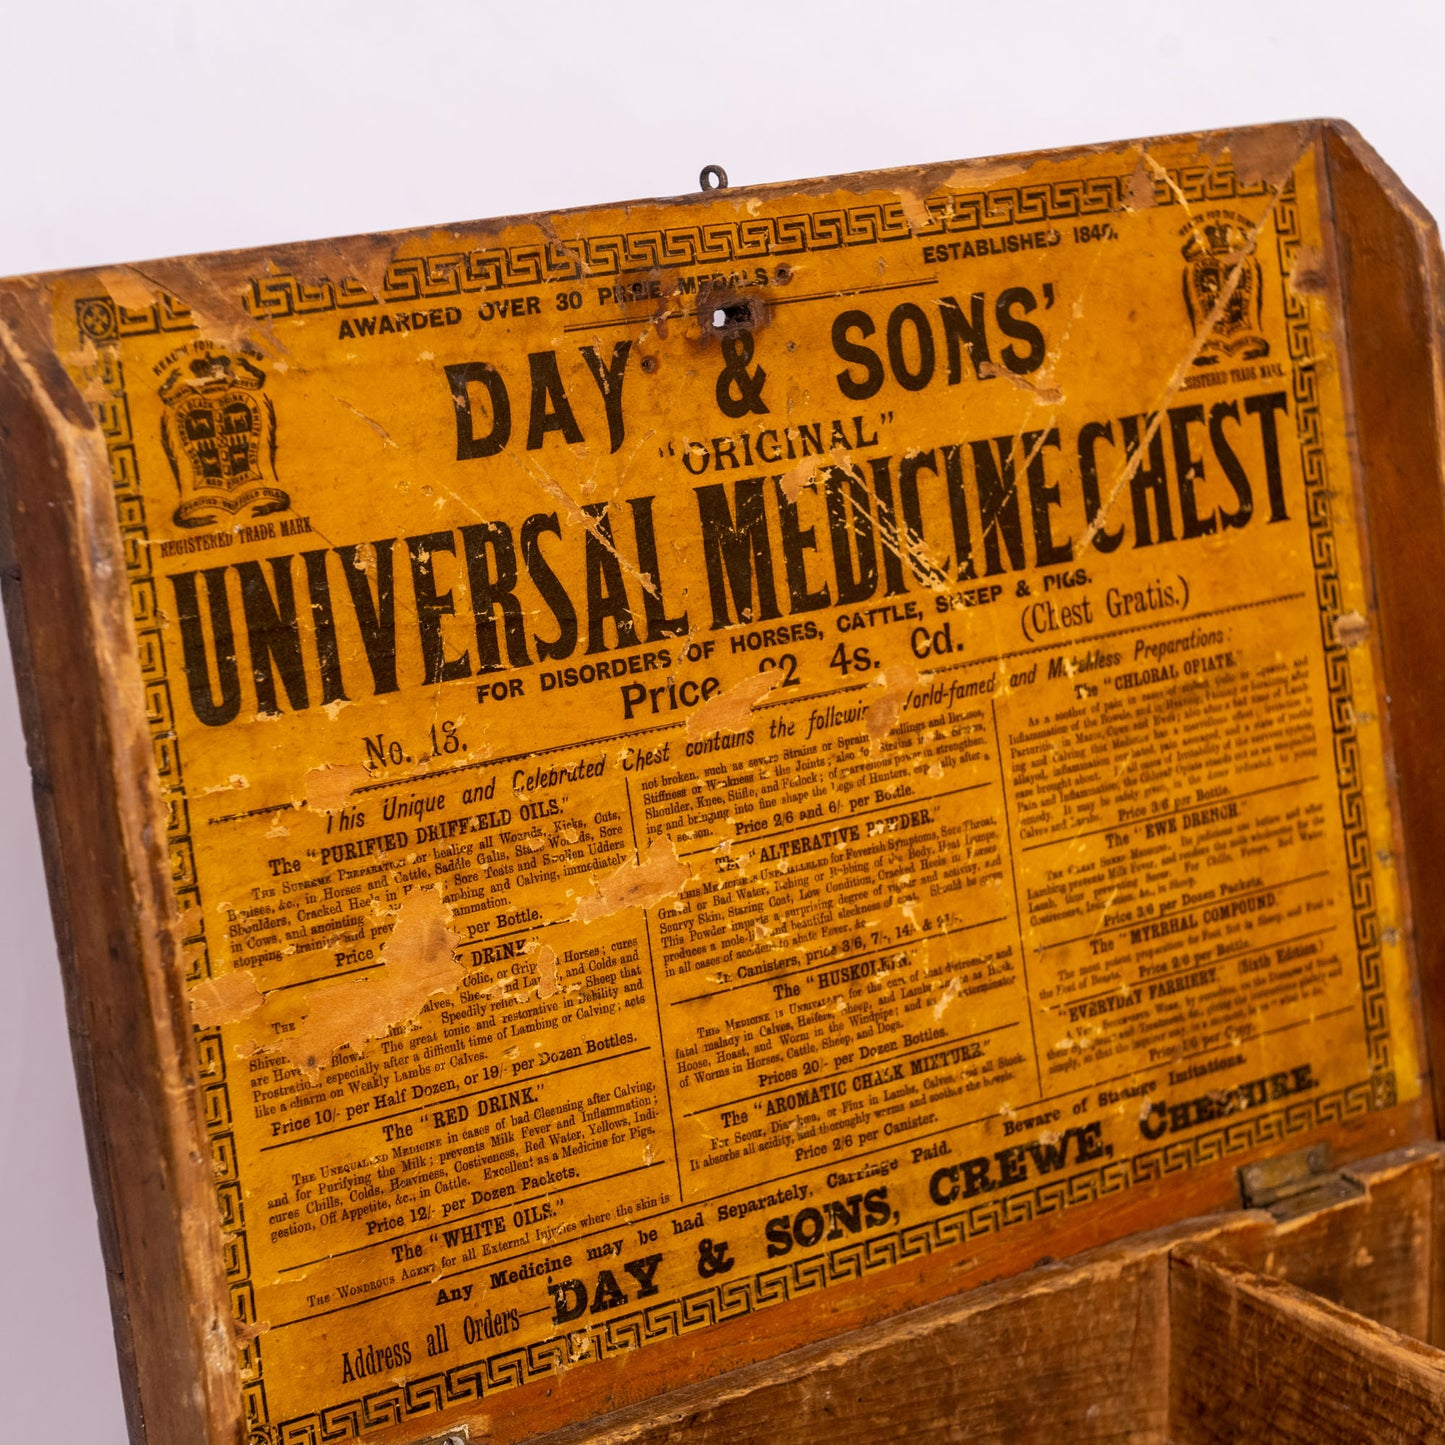 Day & Sons Vintage Universal Medical Chest